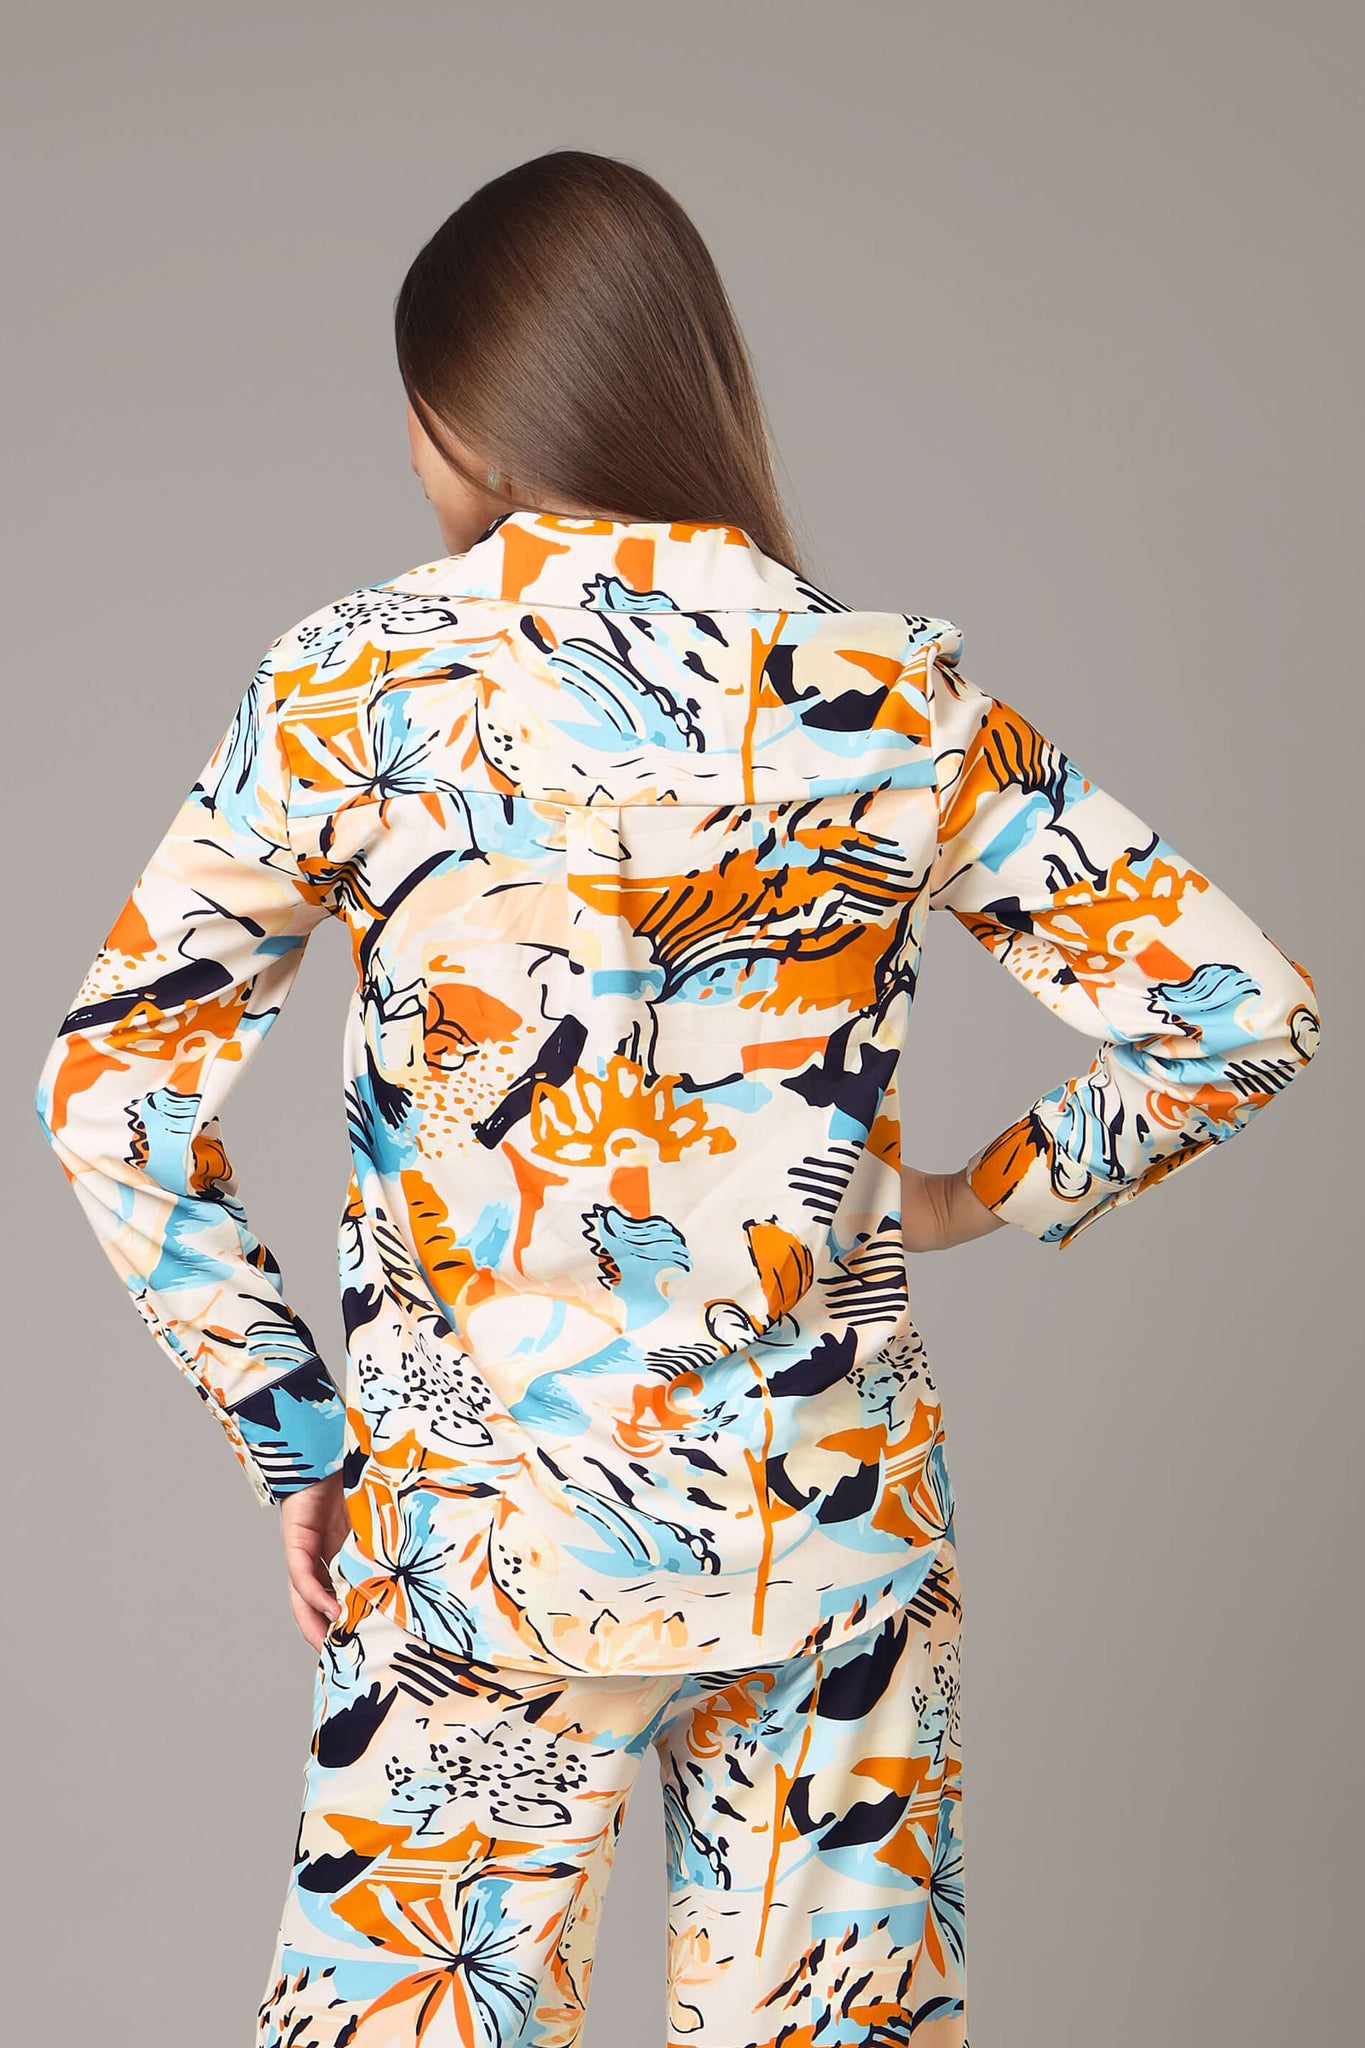 Abstract Shirt for Women